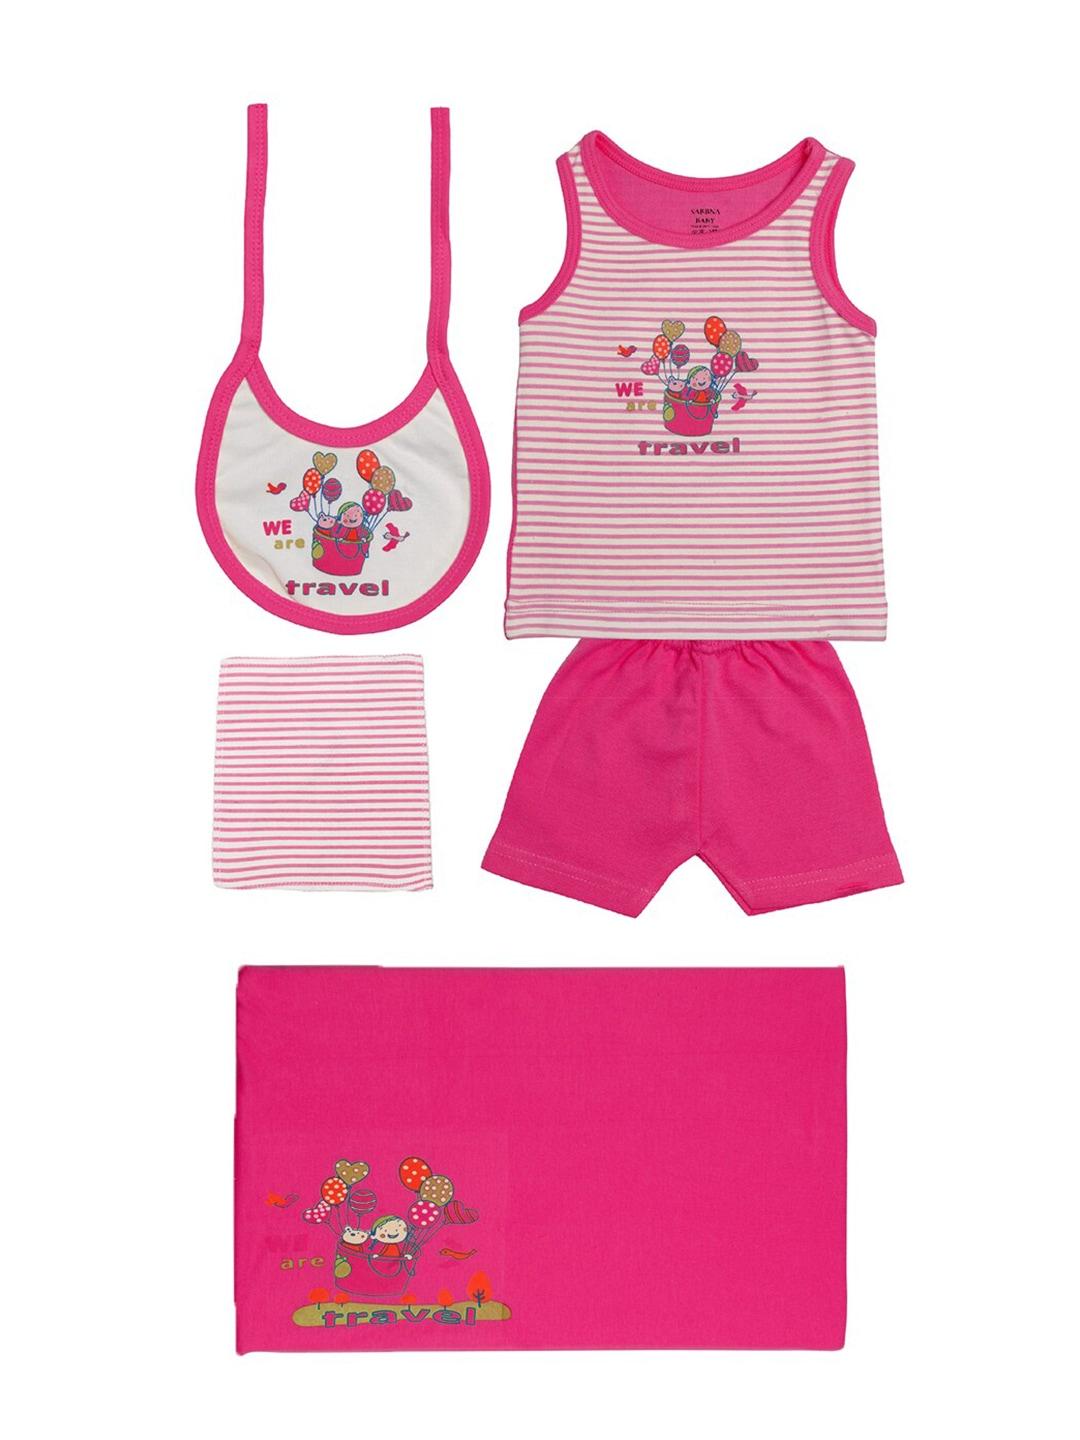 tiny-hug-infant-boys-pink-&-white-printed-pure-cotton-top-with-shorts-clothing-set